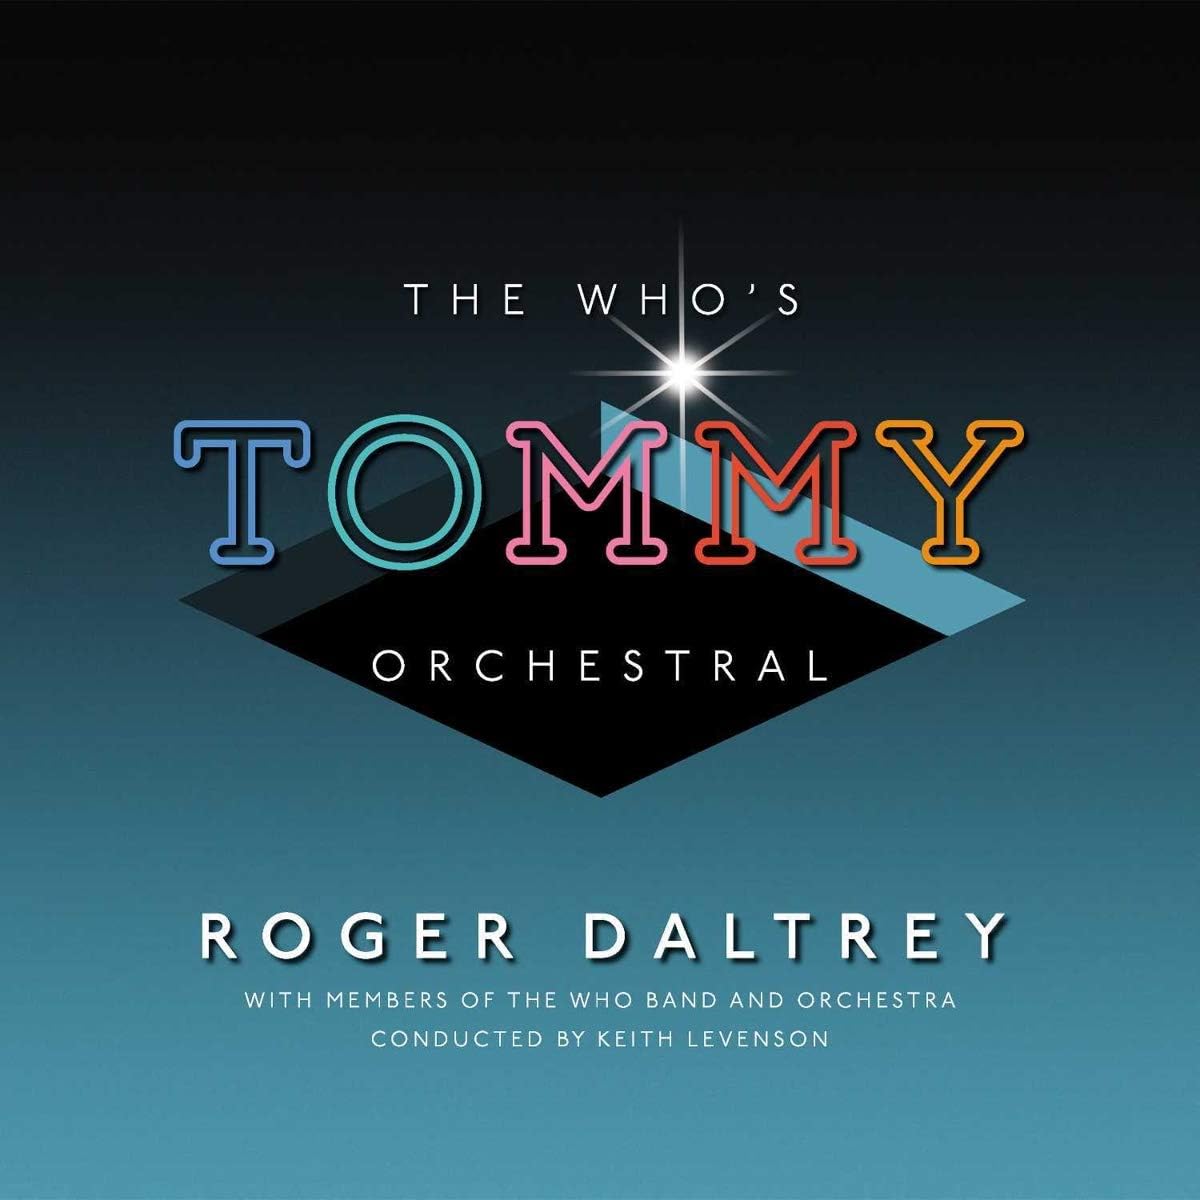 Roger Daltrey - The Who's Tommy Comes Of Age (Orchestral) NEW PRESSING 2 LP